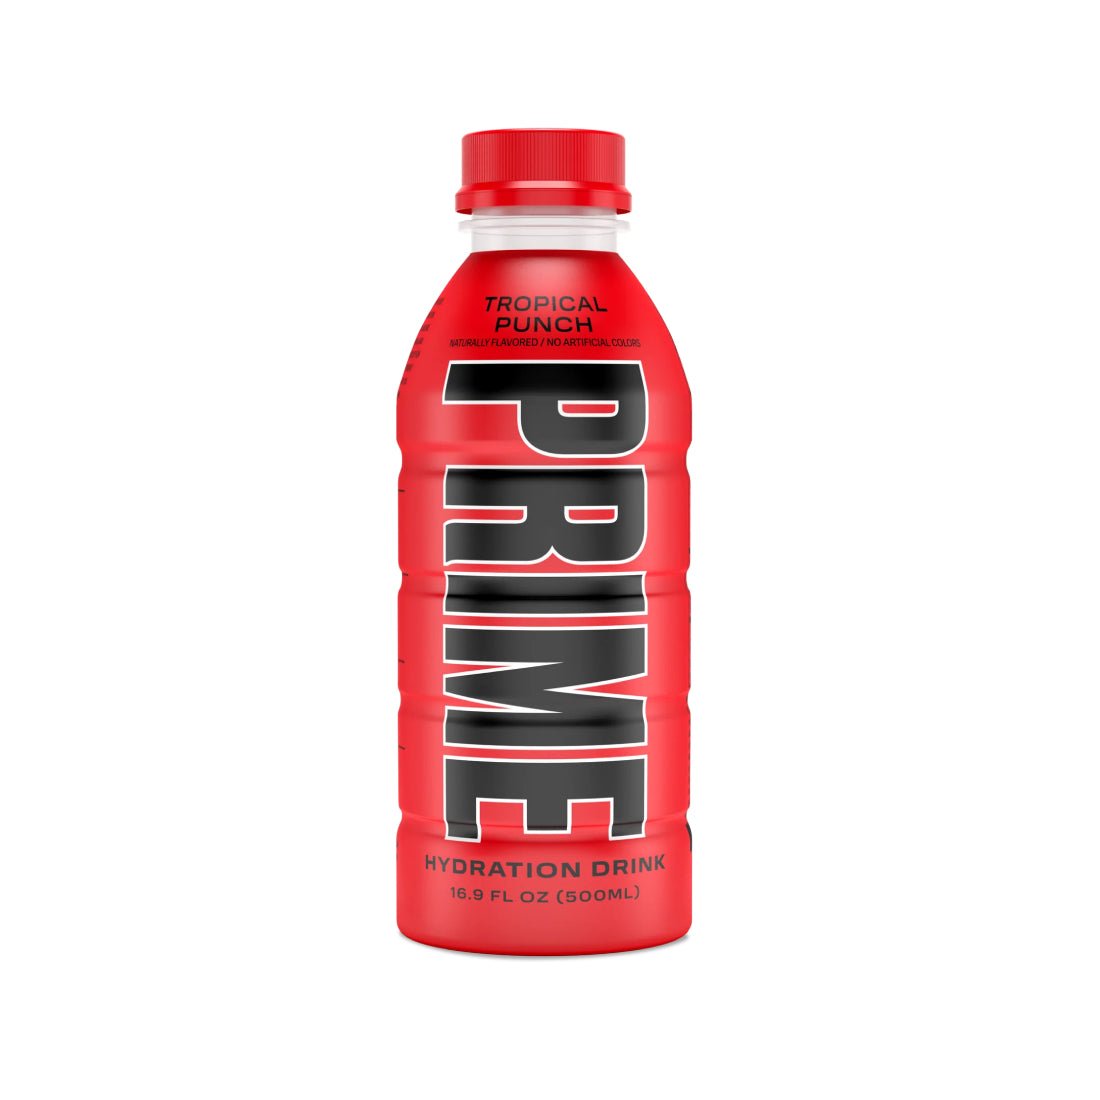 Prime Hydration Drink - Tropical Punch - مشروب هيدراتيه - Store 974 | ستور ٩٧٤